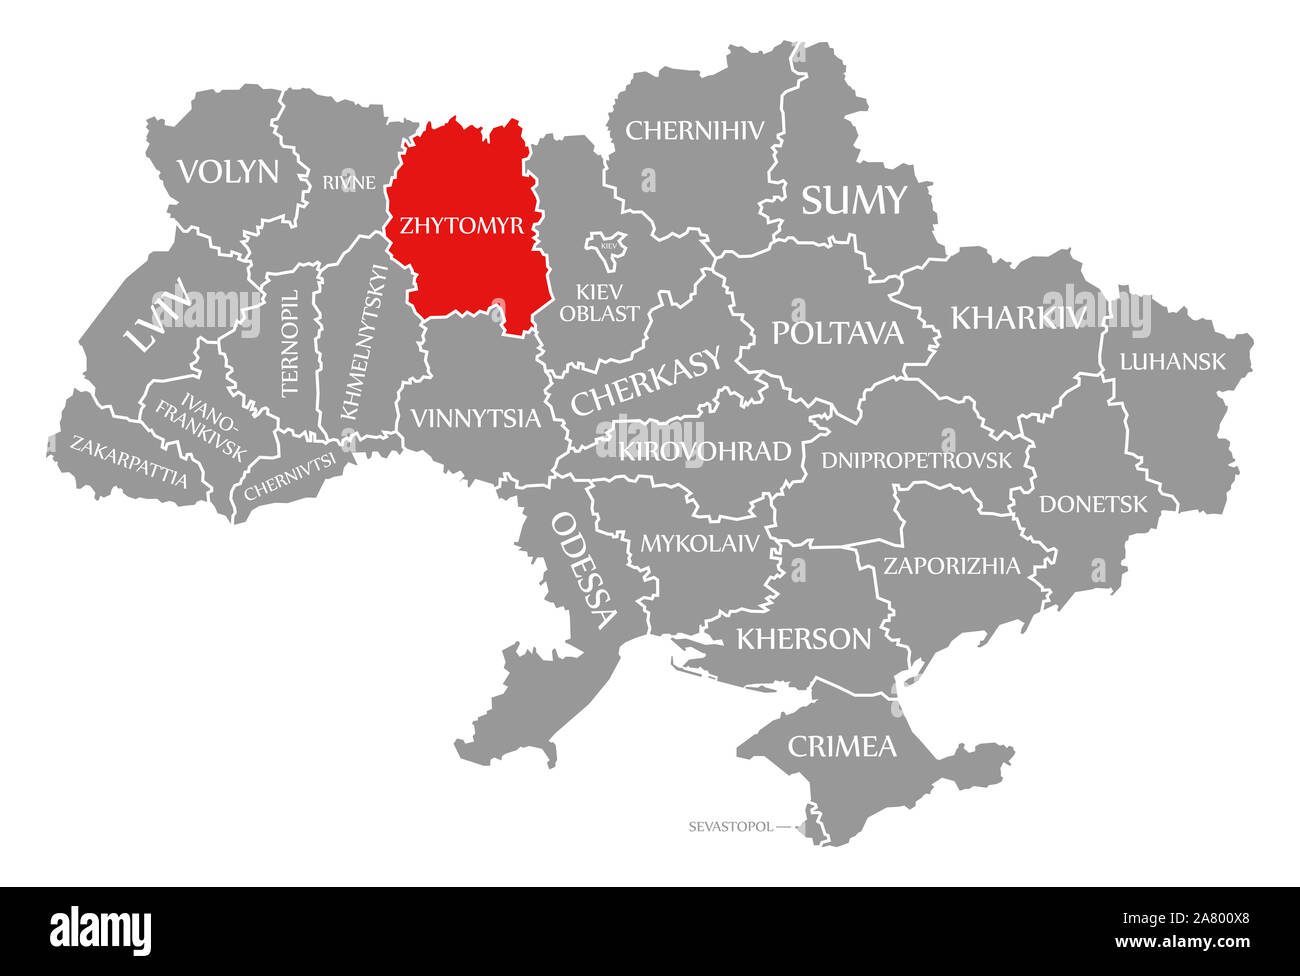 Zhytomyr red highlighted in map of the Ukraine Stock Photo